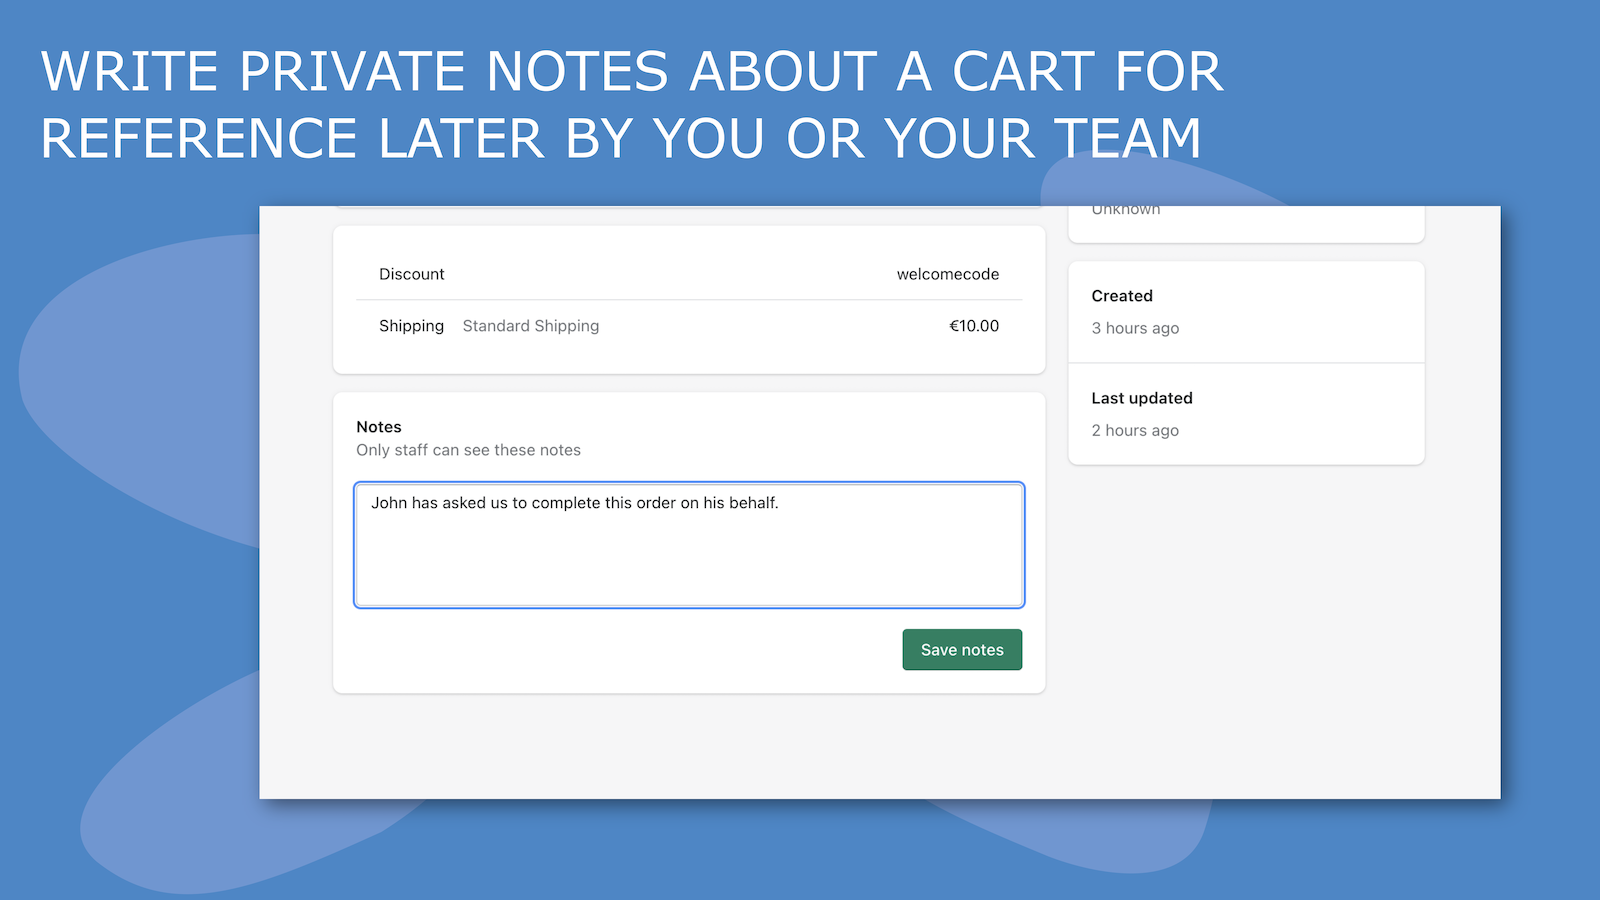 Write private notes about a cart for internal reference